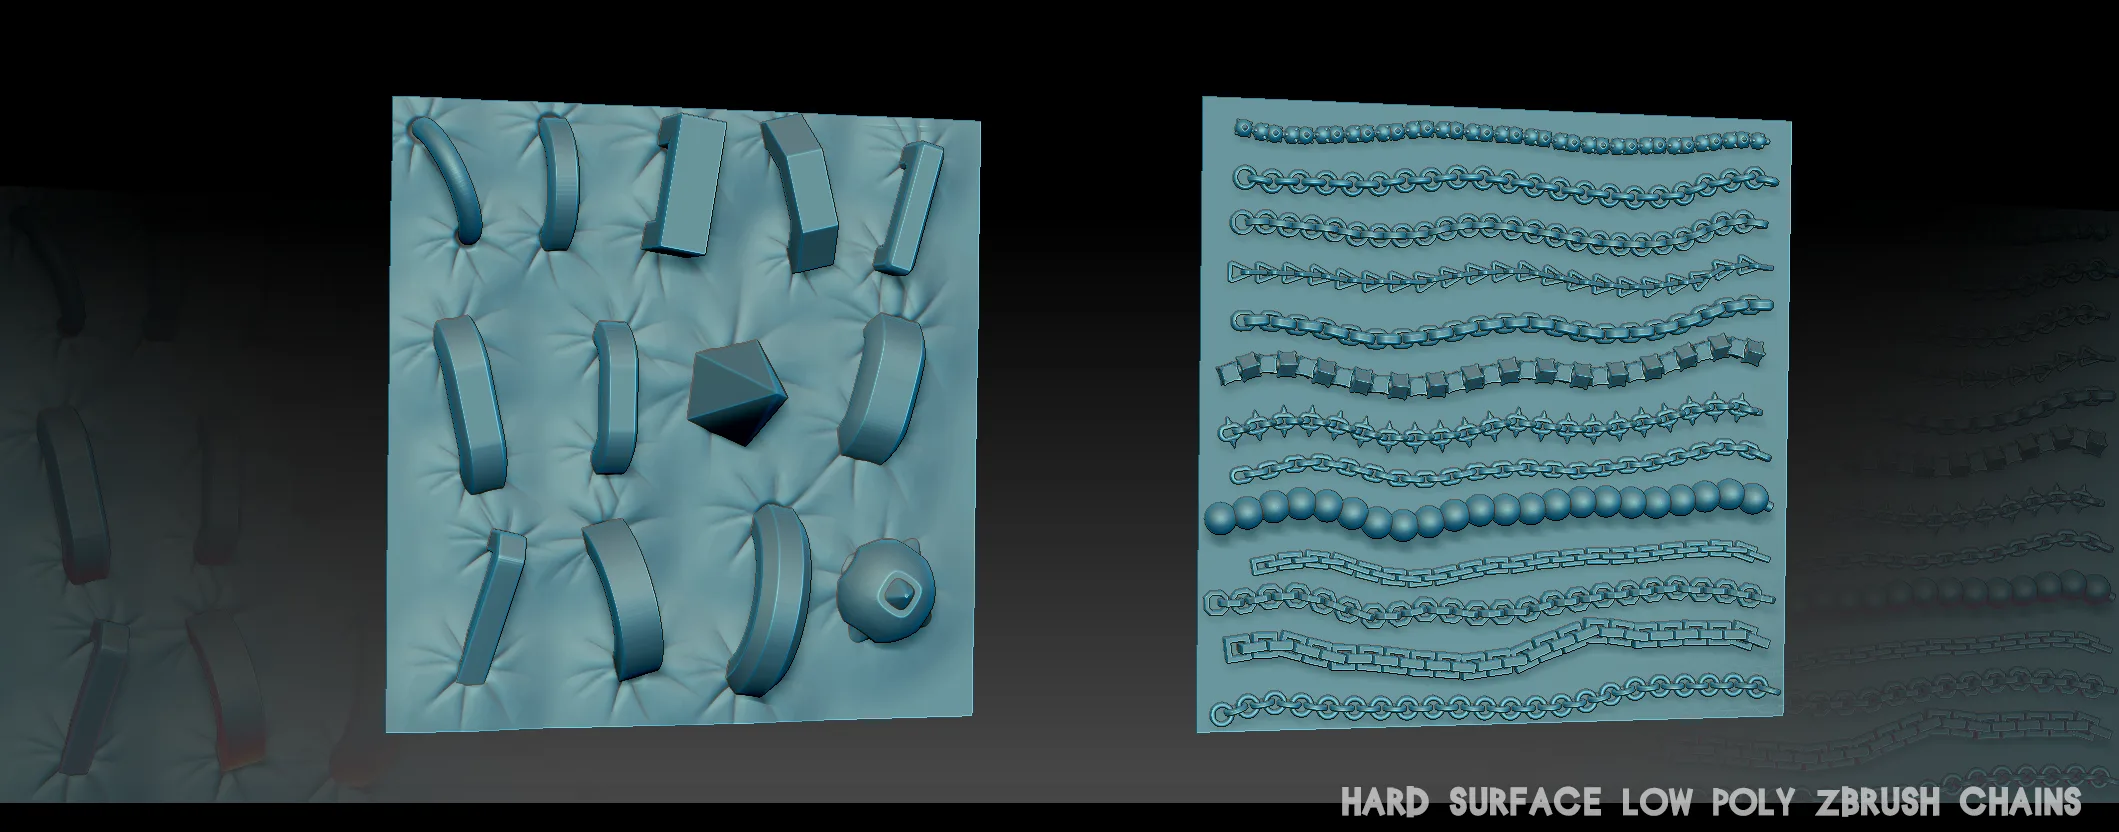 Hard Surface Low Poly Zbrush Chains